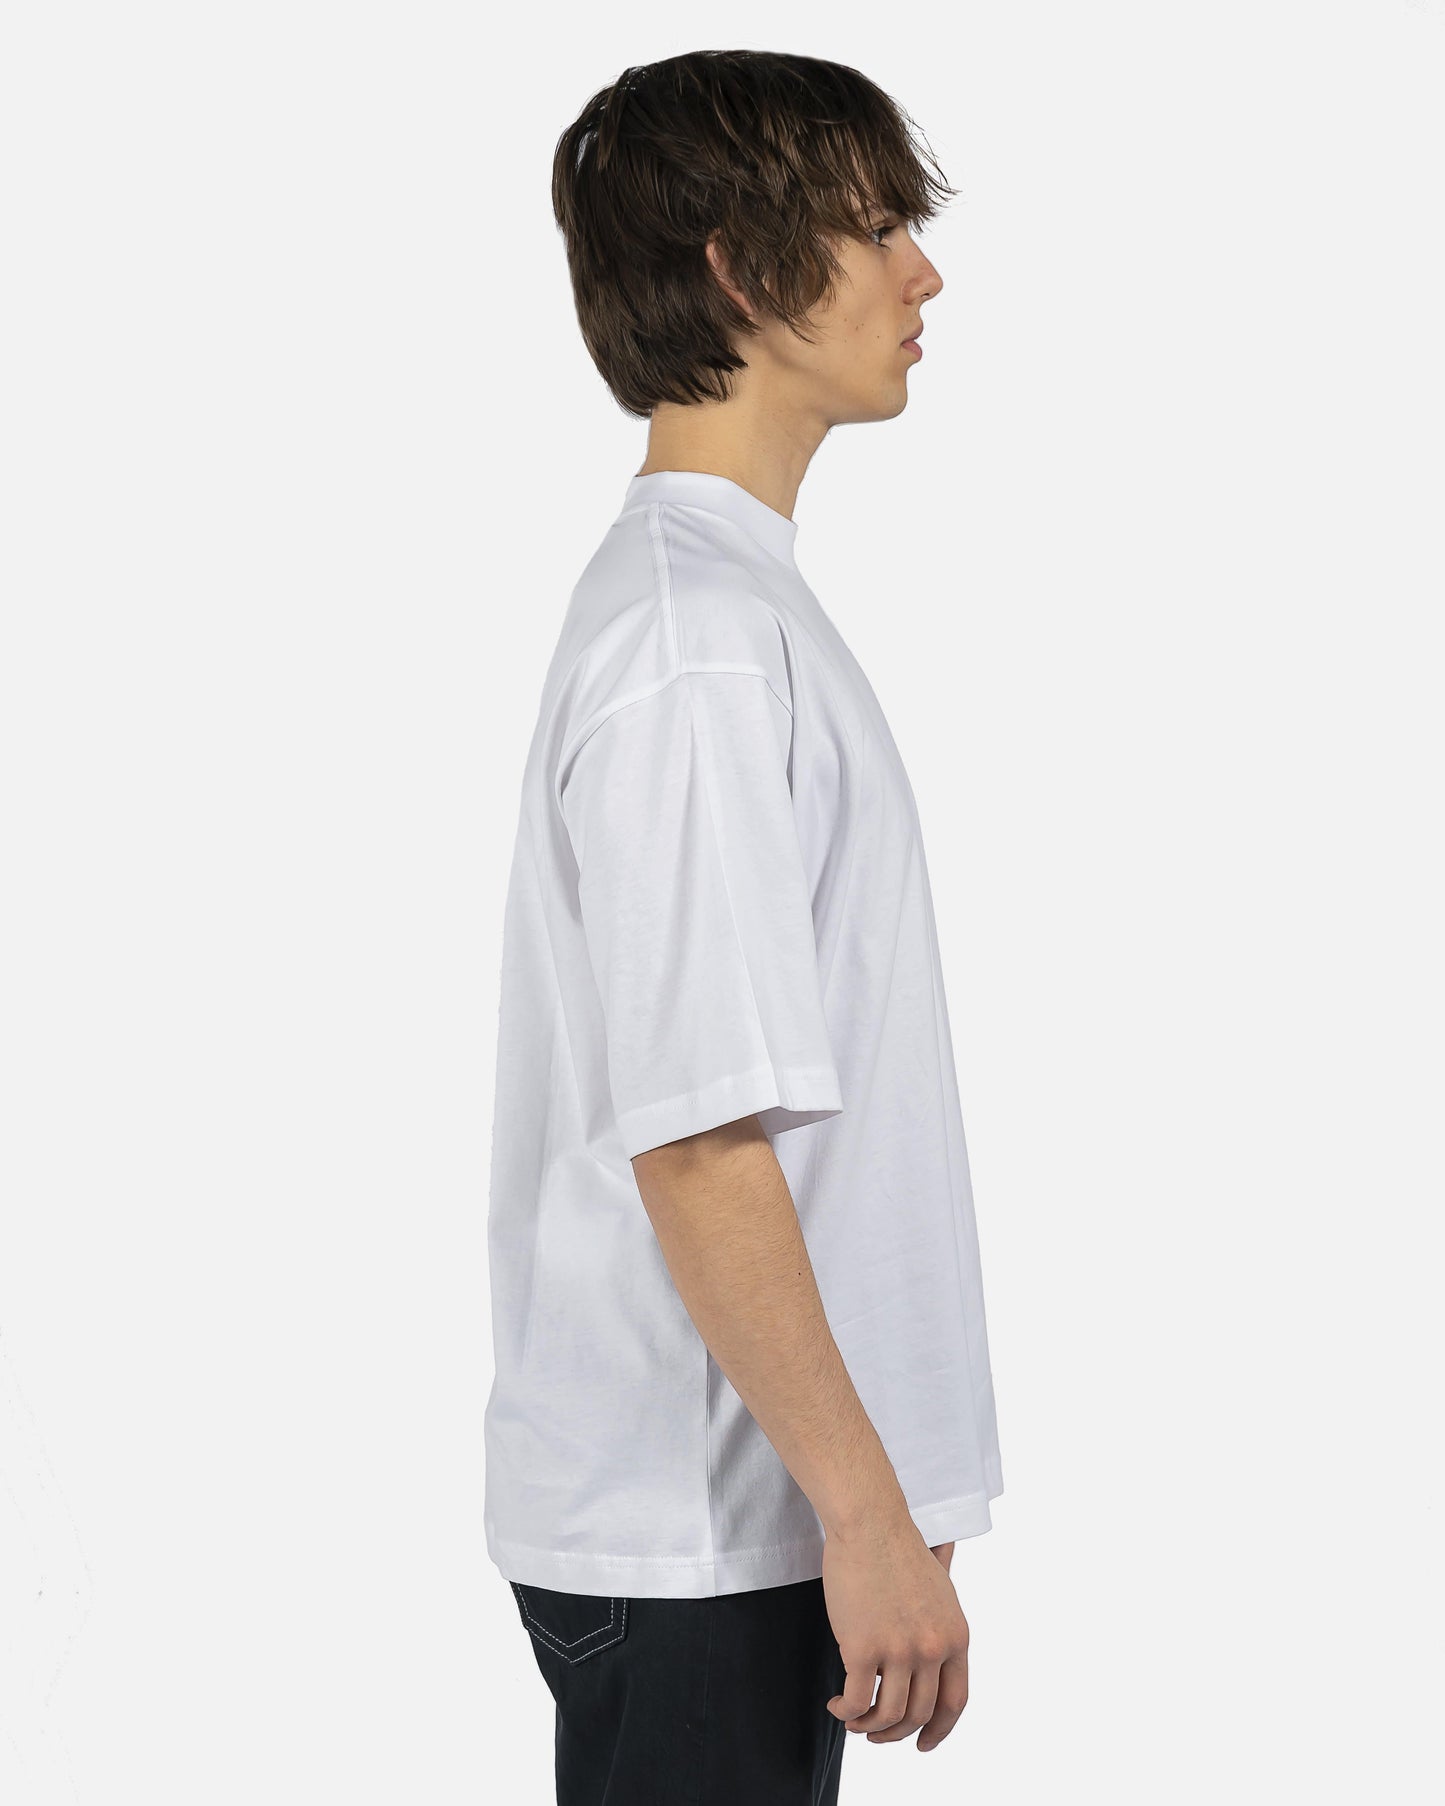 Marni Men's T-Shirts Relaxed Fit T-Shirt in Lily White